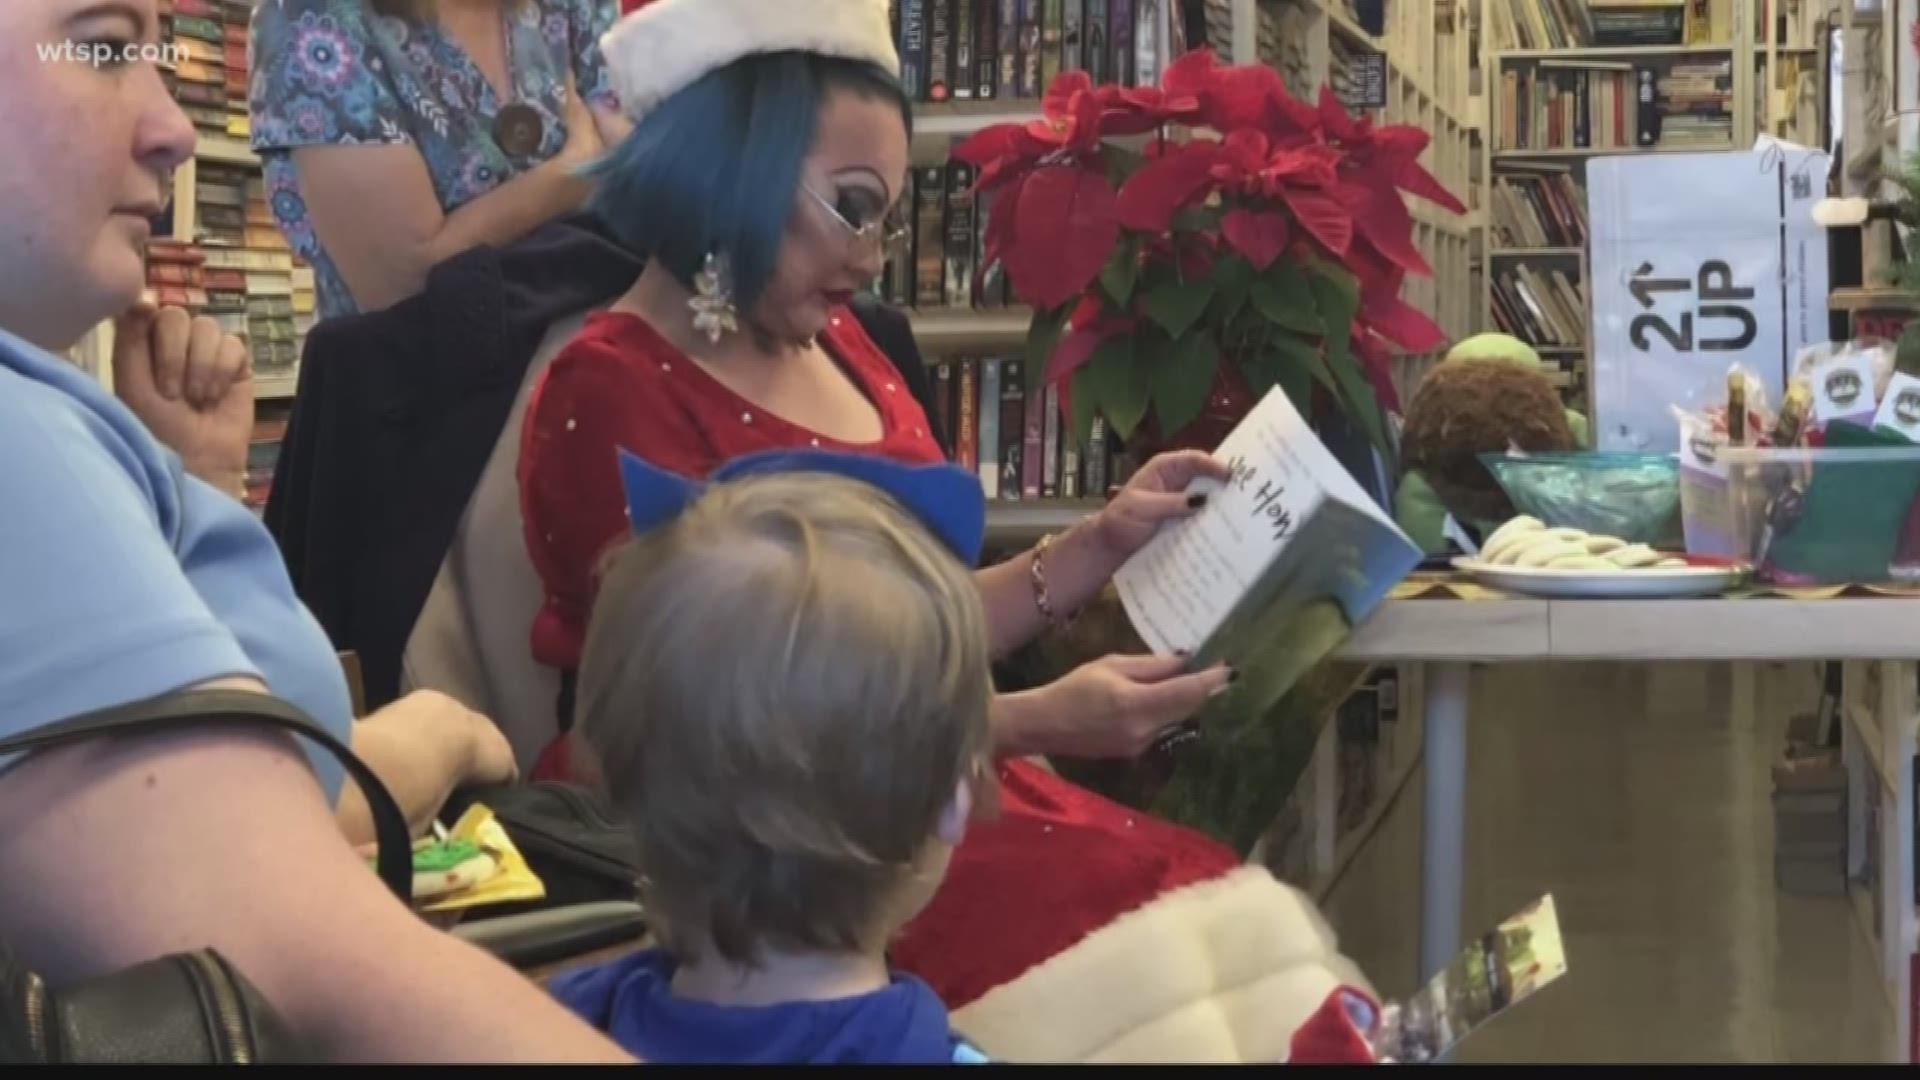 Supporters contend their efforts to move a monthly book reading for children to a publicly-owned building is being met with resistance by city leaders because it’s drag queens who are doing the reading.

"Drag Queen Story Hour" book readings for children have been popping up cities across the country in recent years. https://on.wtsp.com/2OItFR2